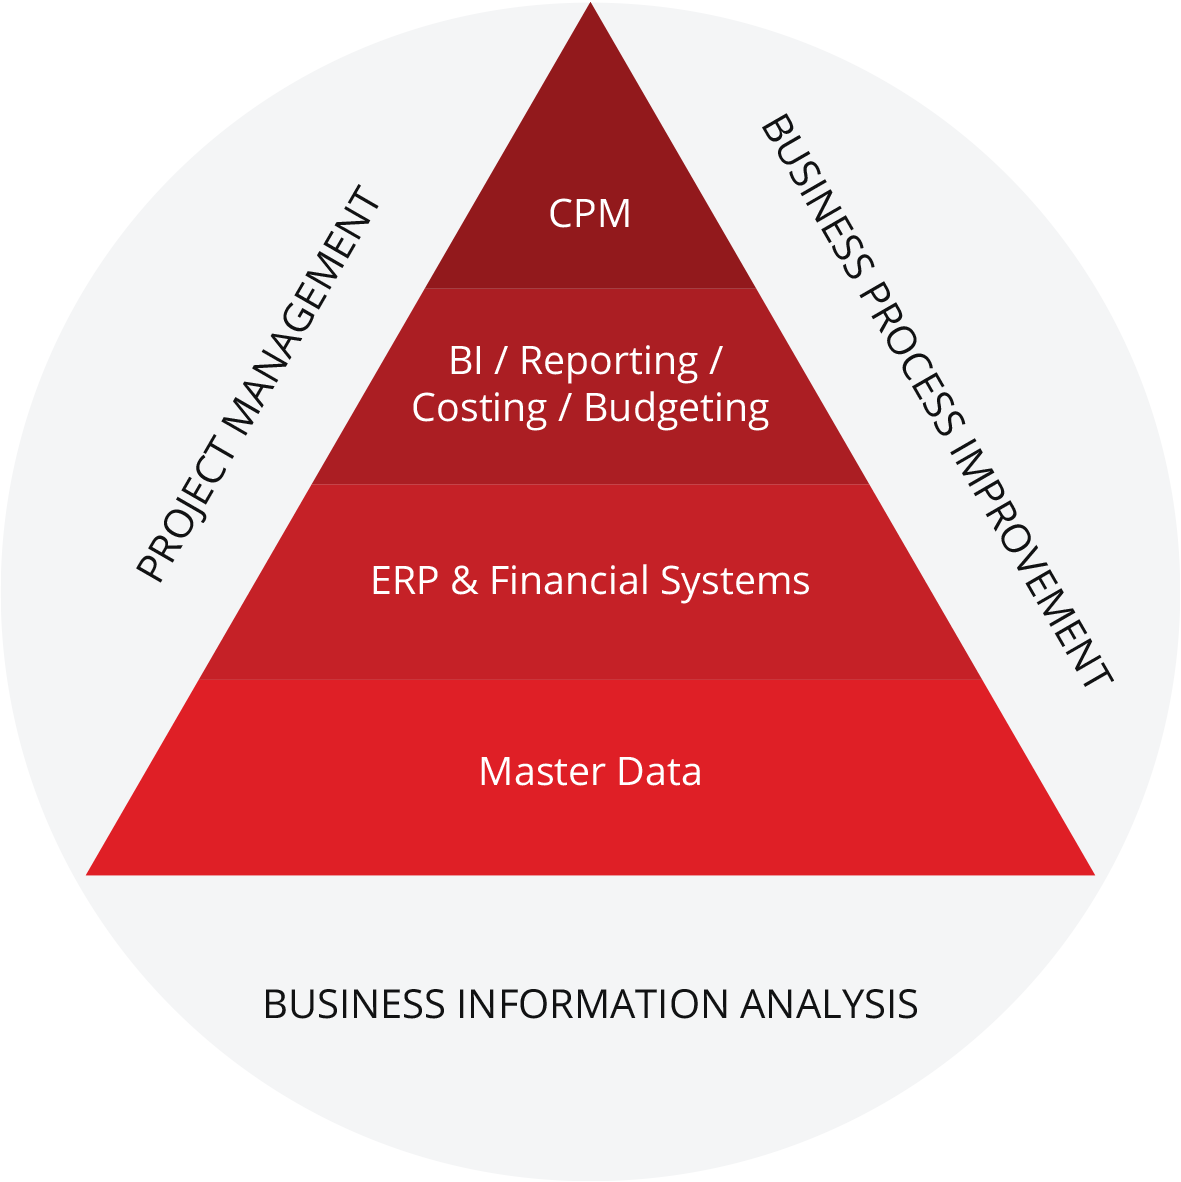 Corporate Performance Management is the top of the information pyramid.